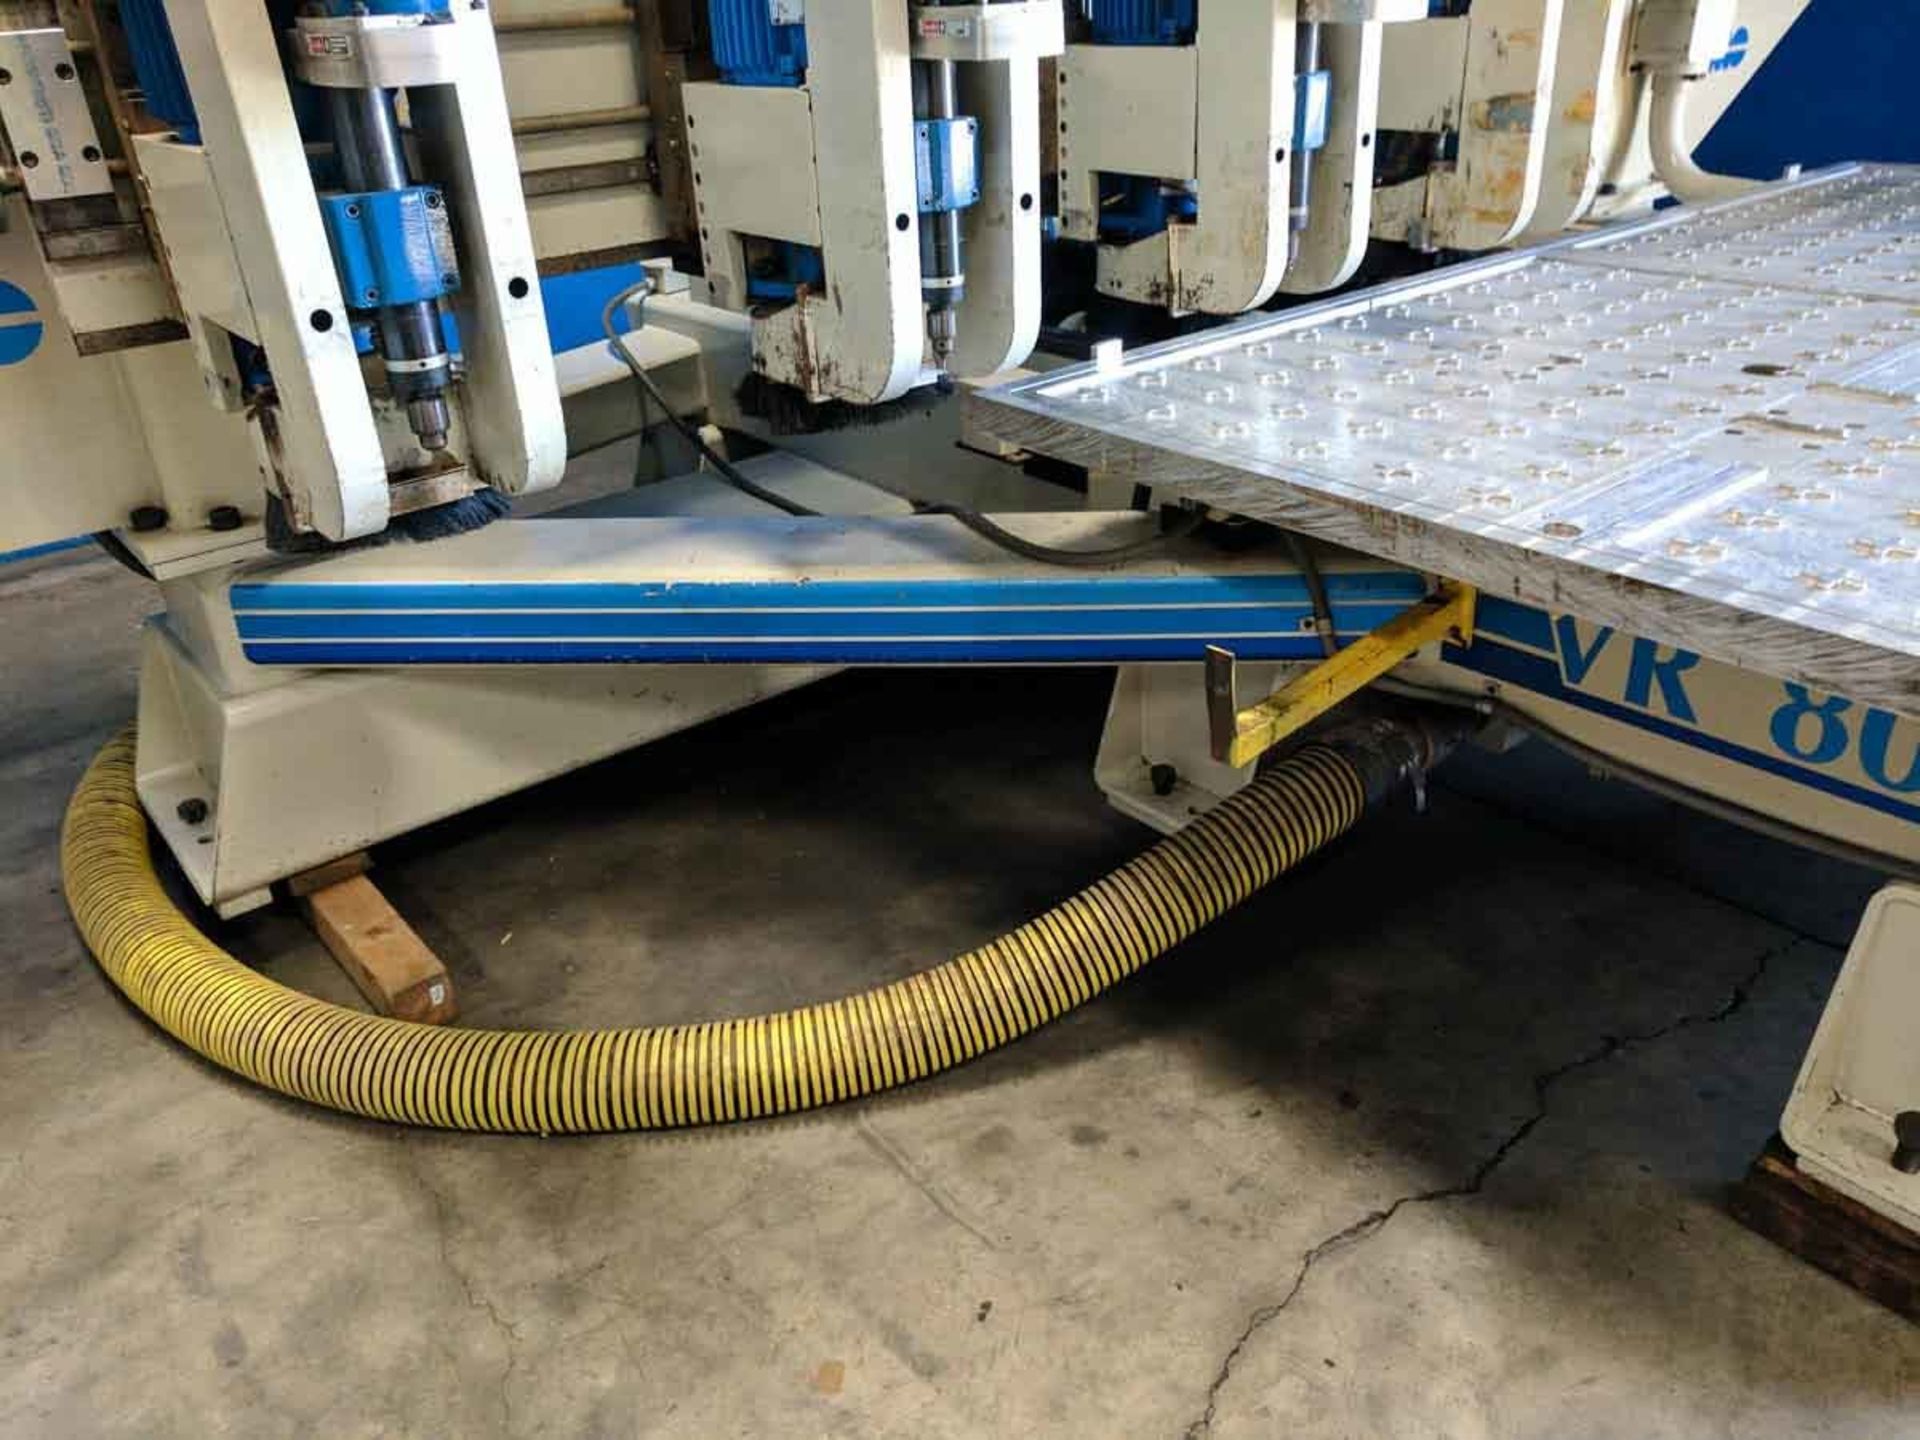 Komo VR805Q Fanuc CNC Metal Router 3 Axis 4 Spindle 96" x 60" Sheet Size - Located In: Huntington - Image 16 of 24